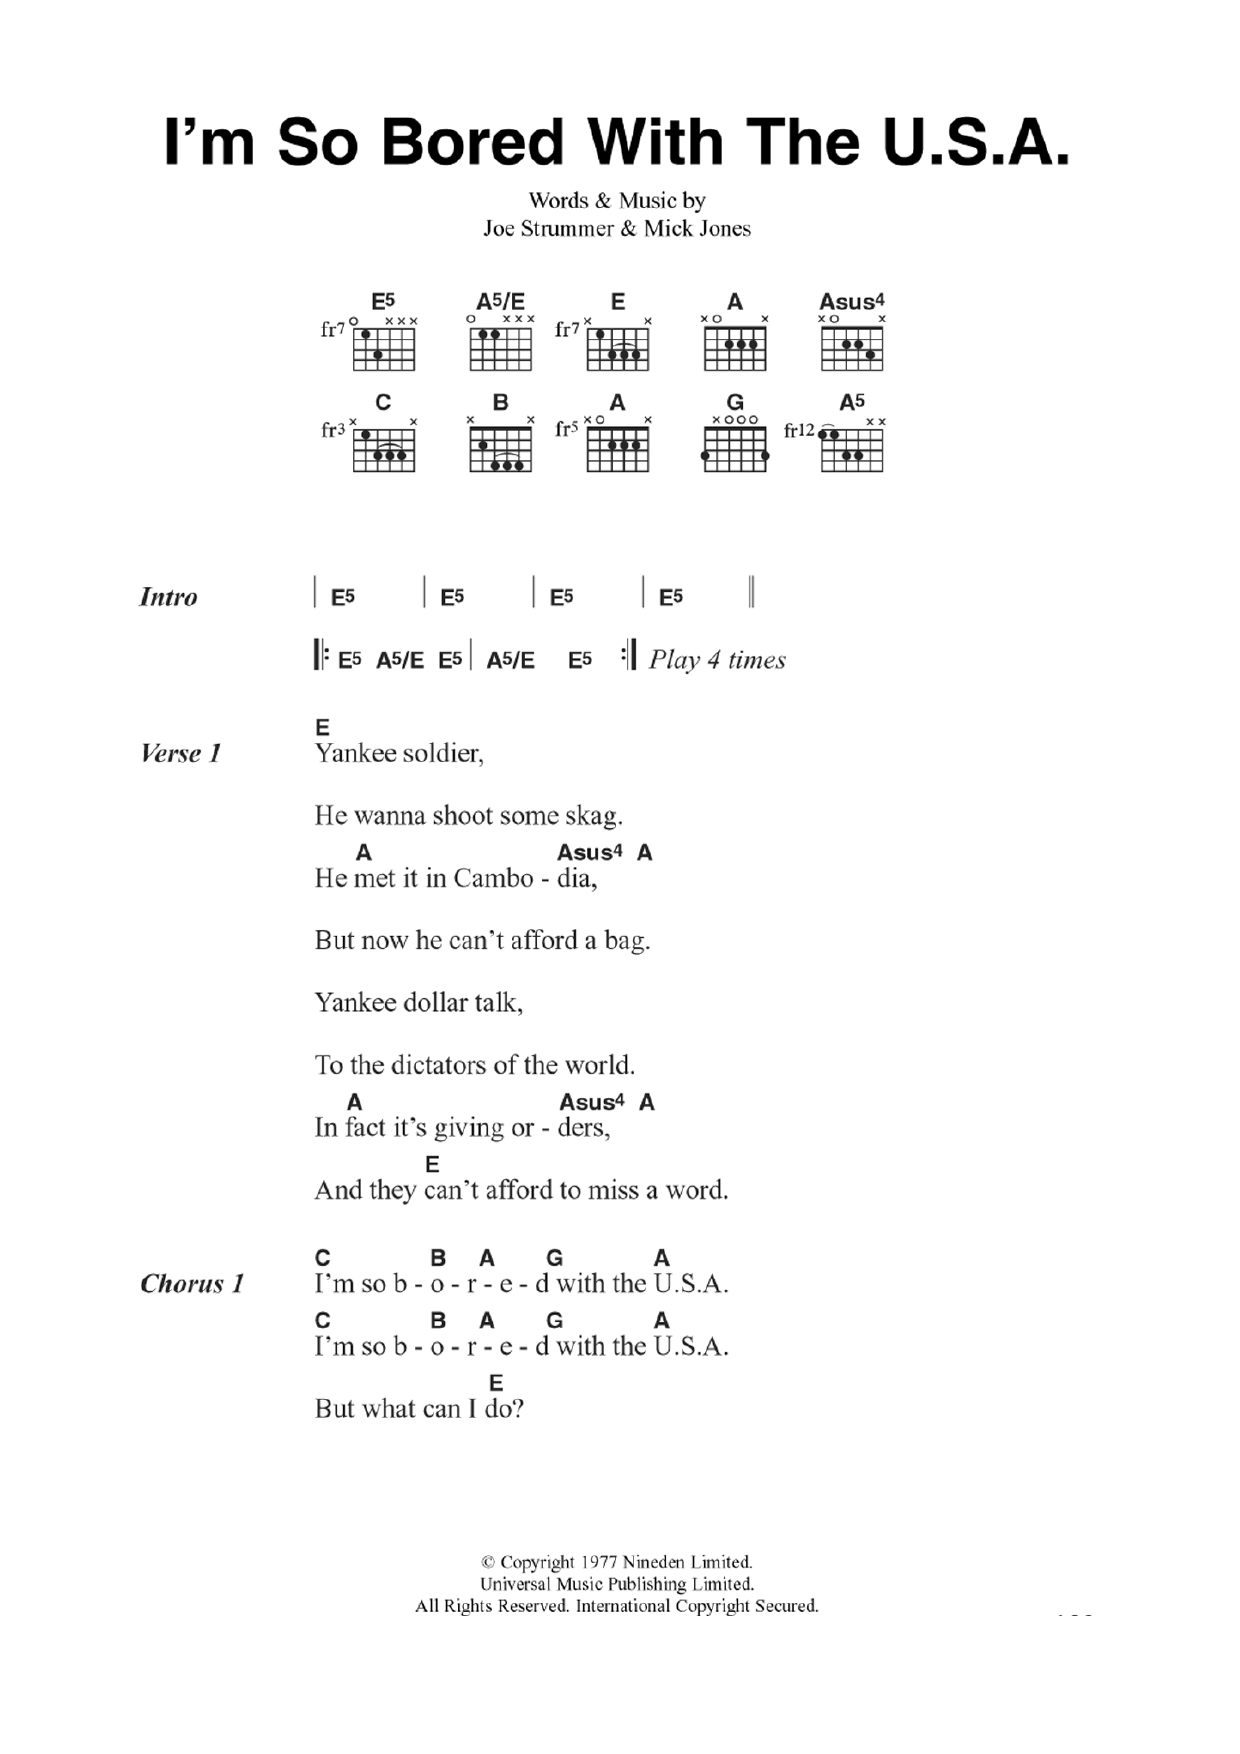 Download The Clash I'm So Bored With The U.S.A. Sheet Music